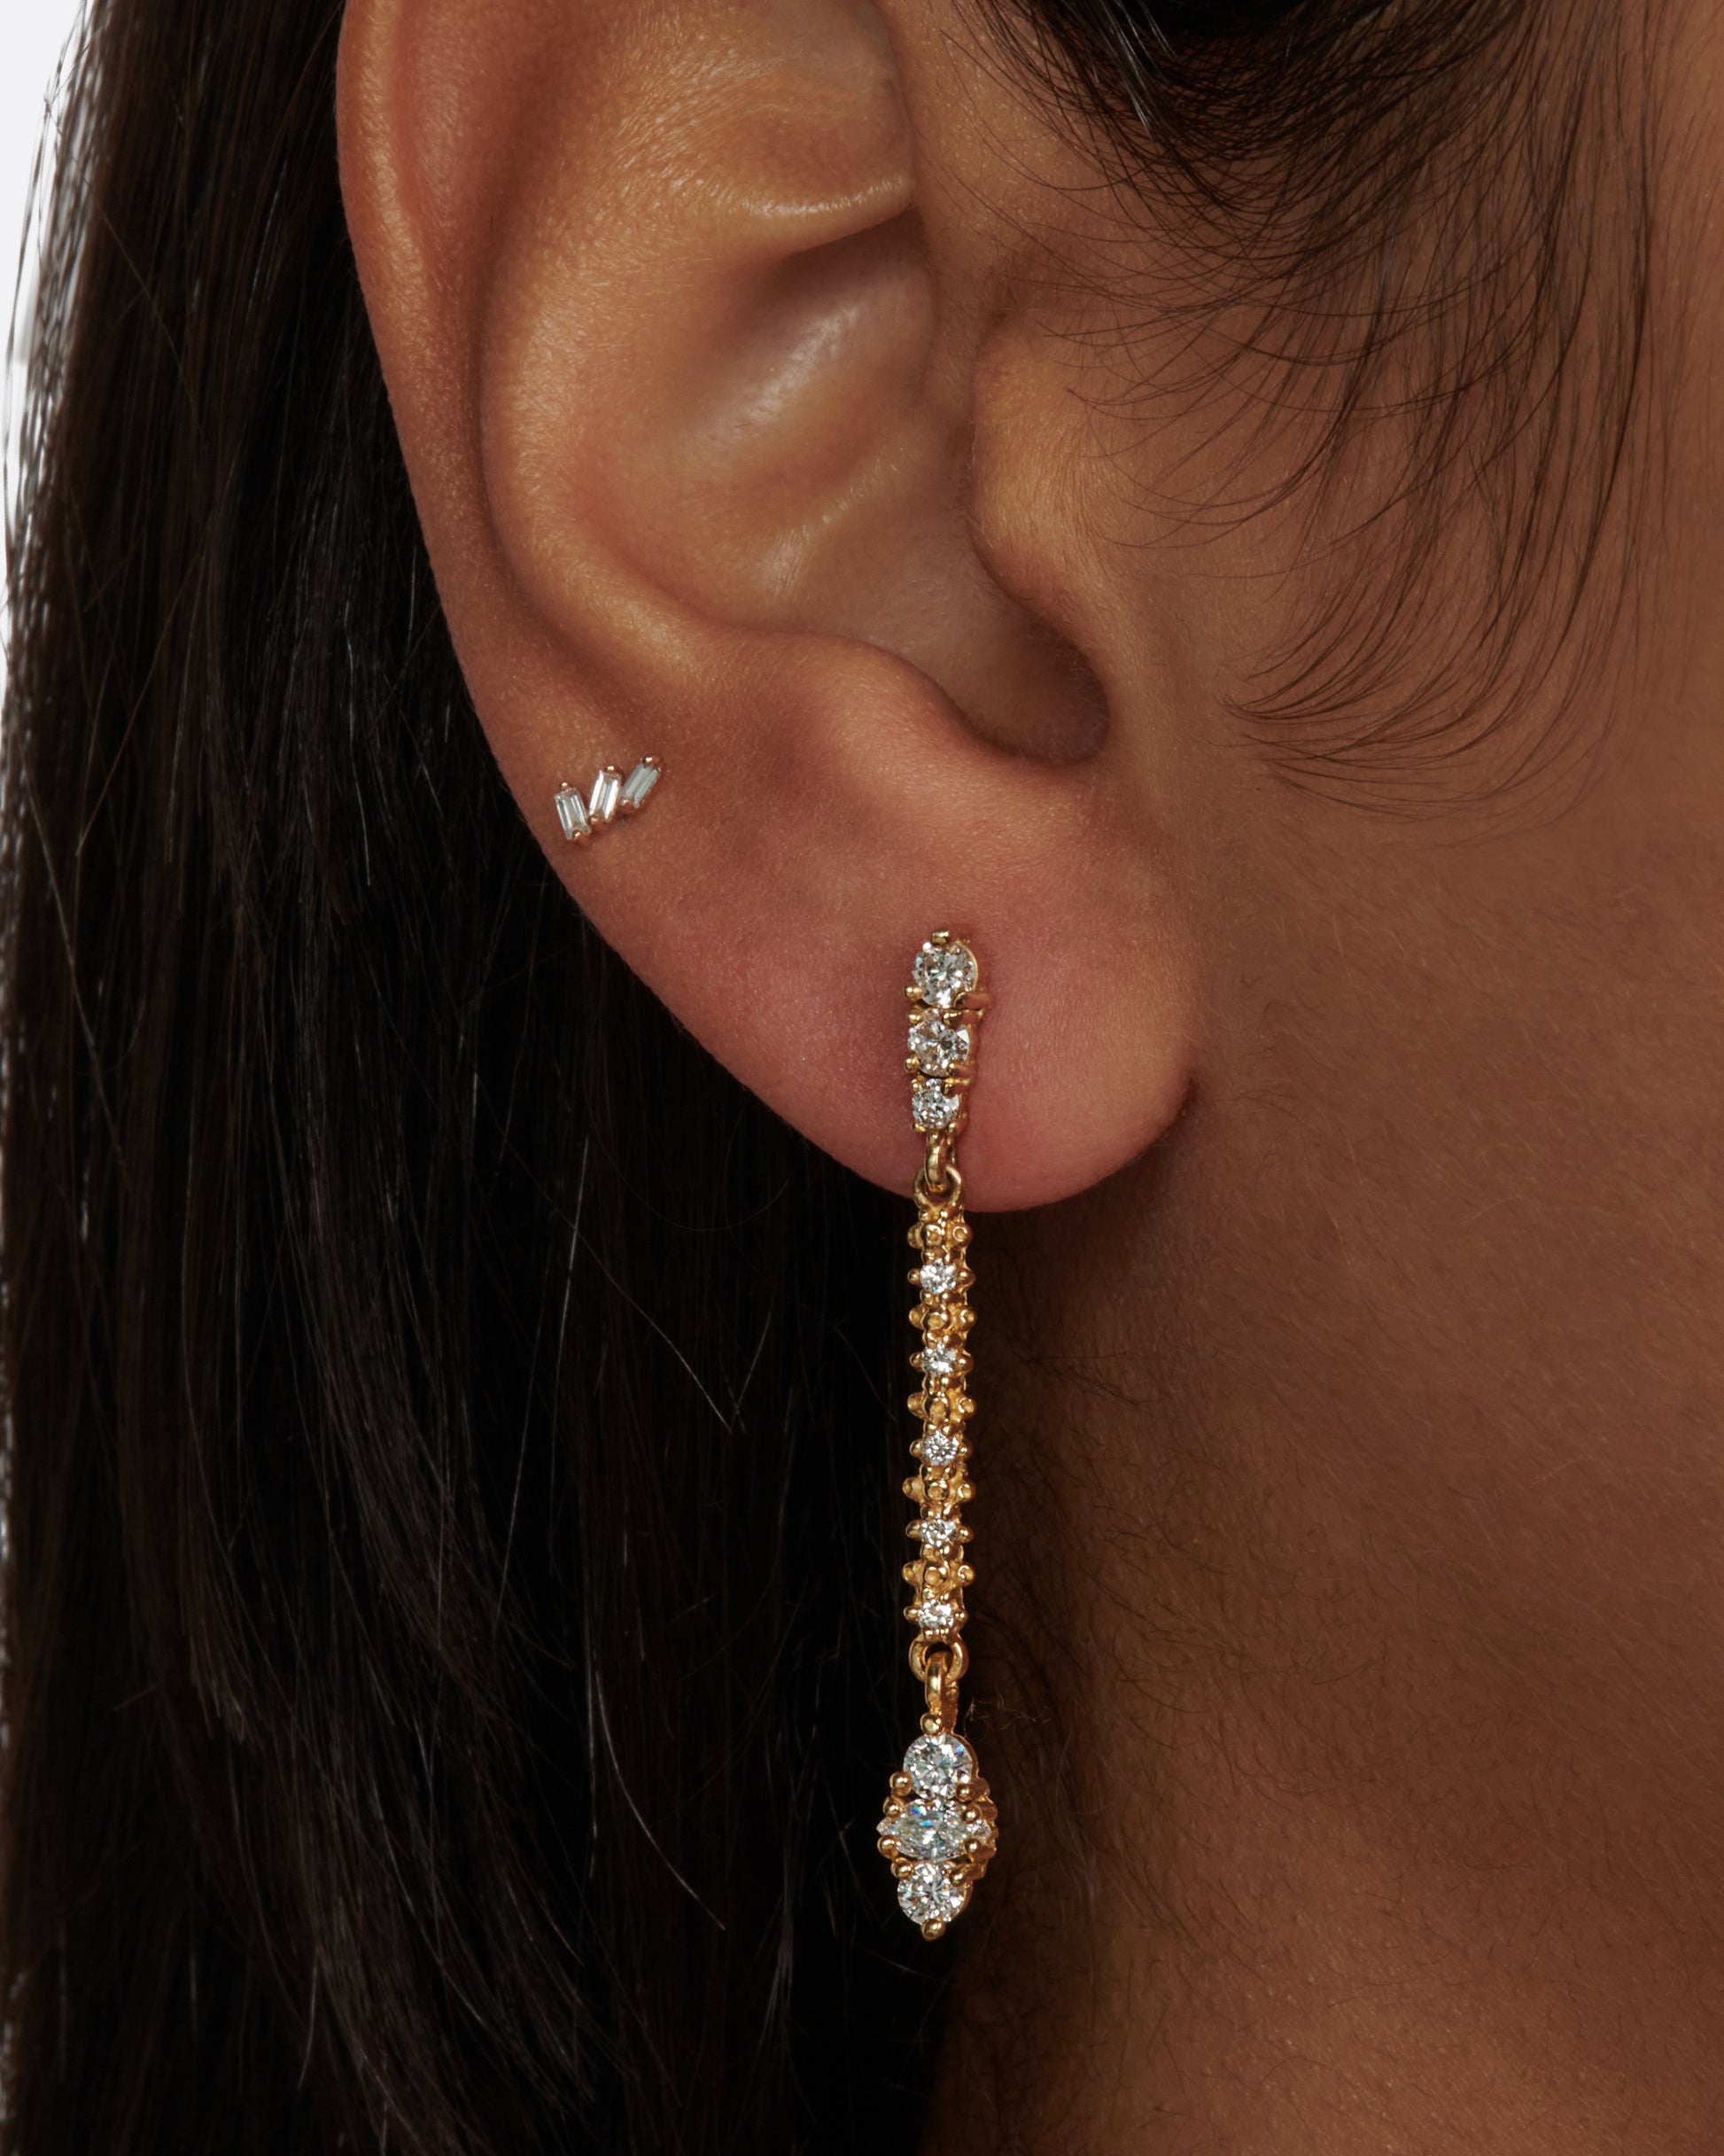 A pair of classic stud earrings with textured round and marquise diamond drops.